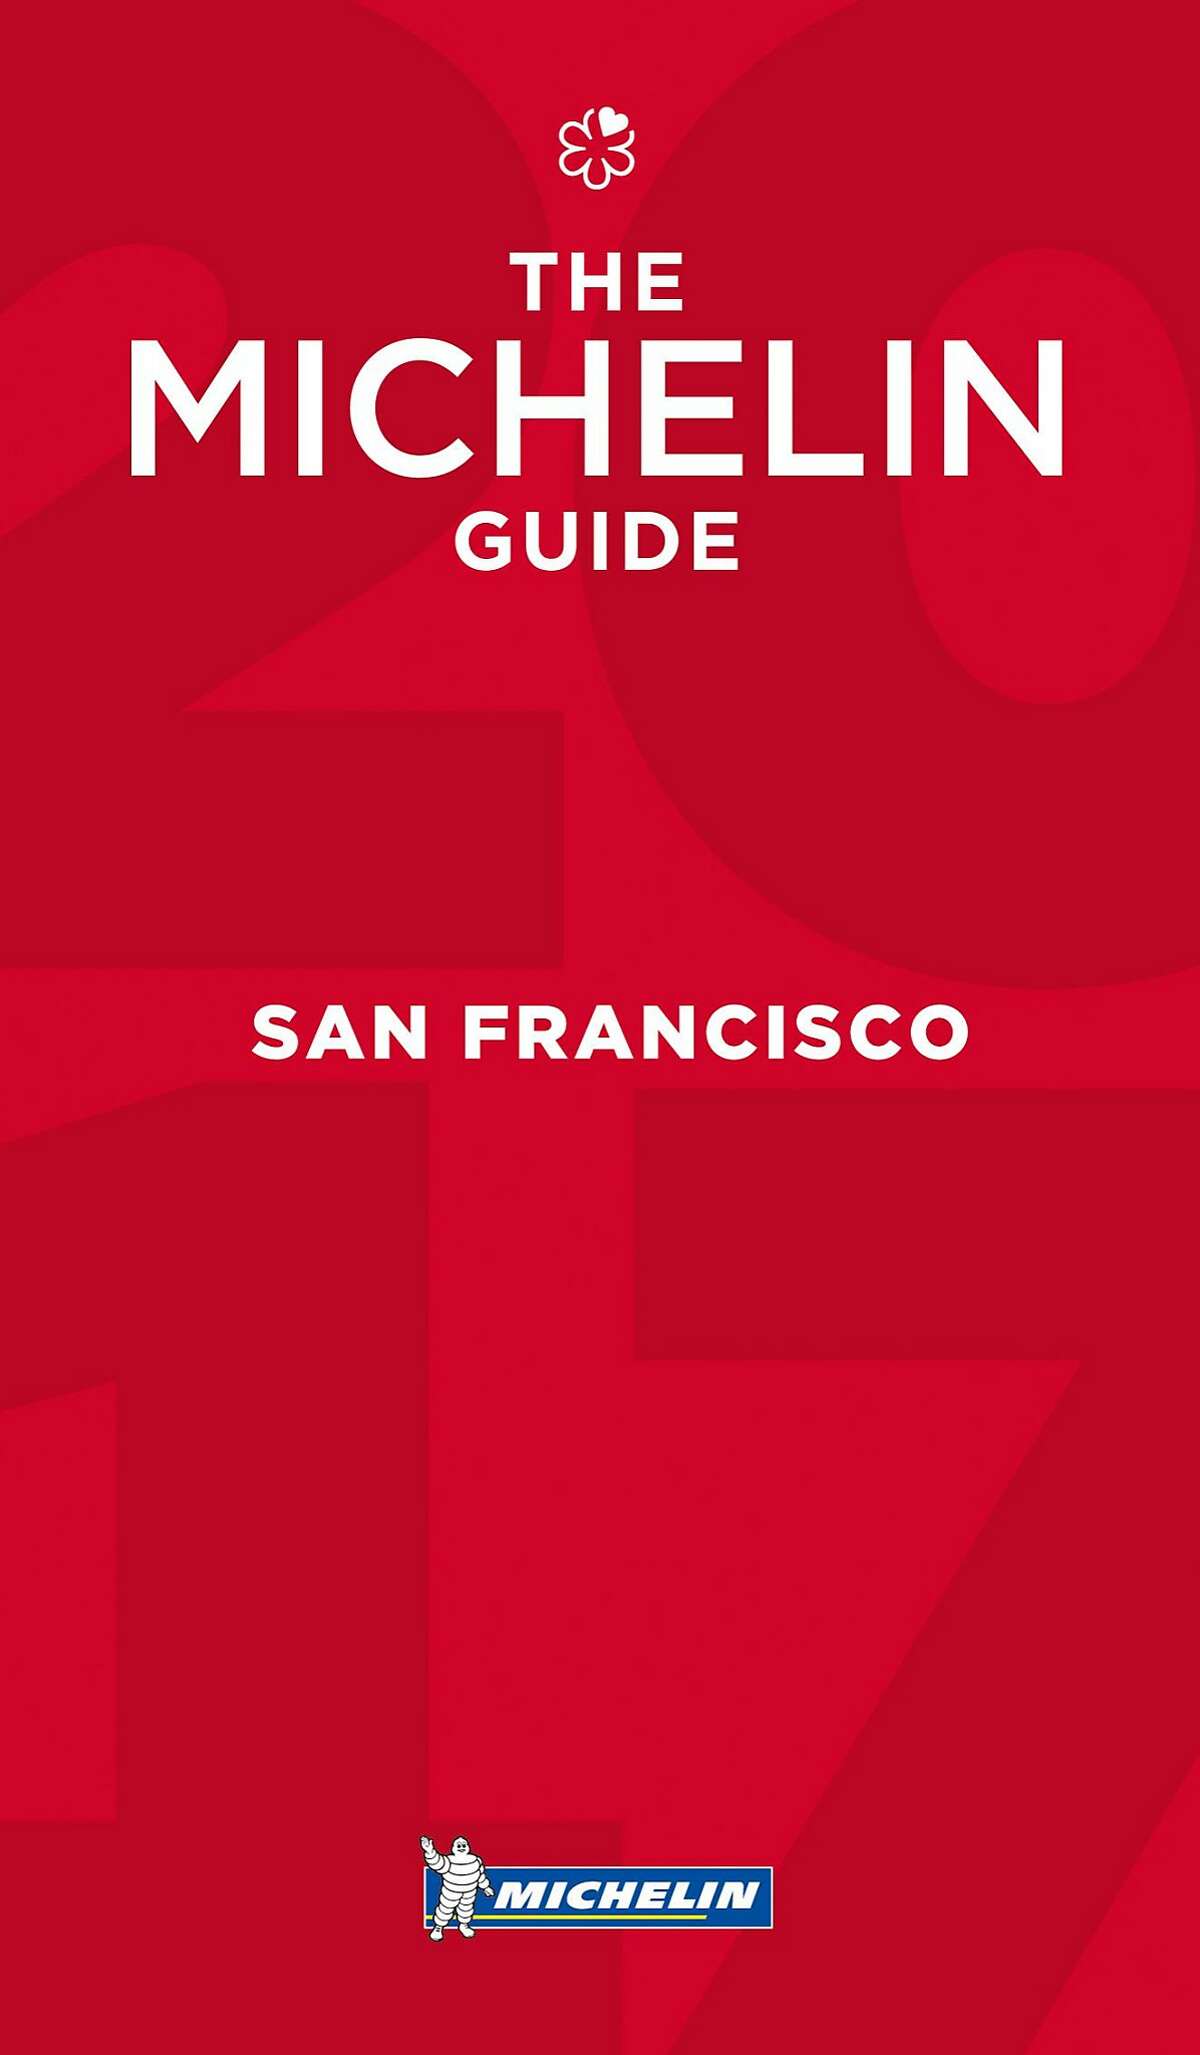 California to get its first statewide Michelin Guide